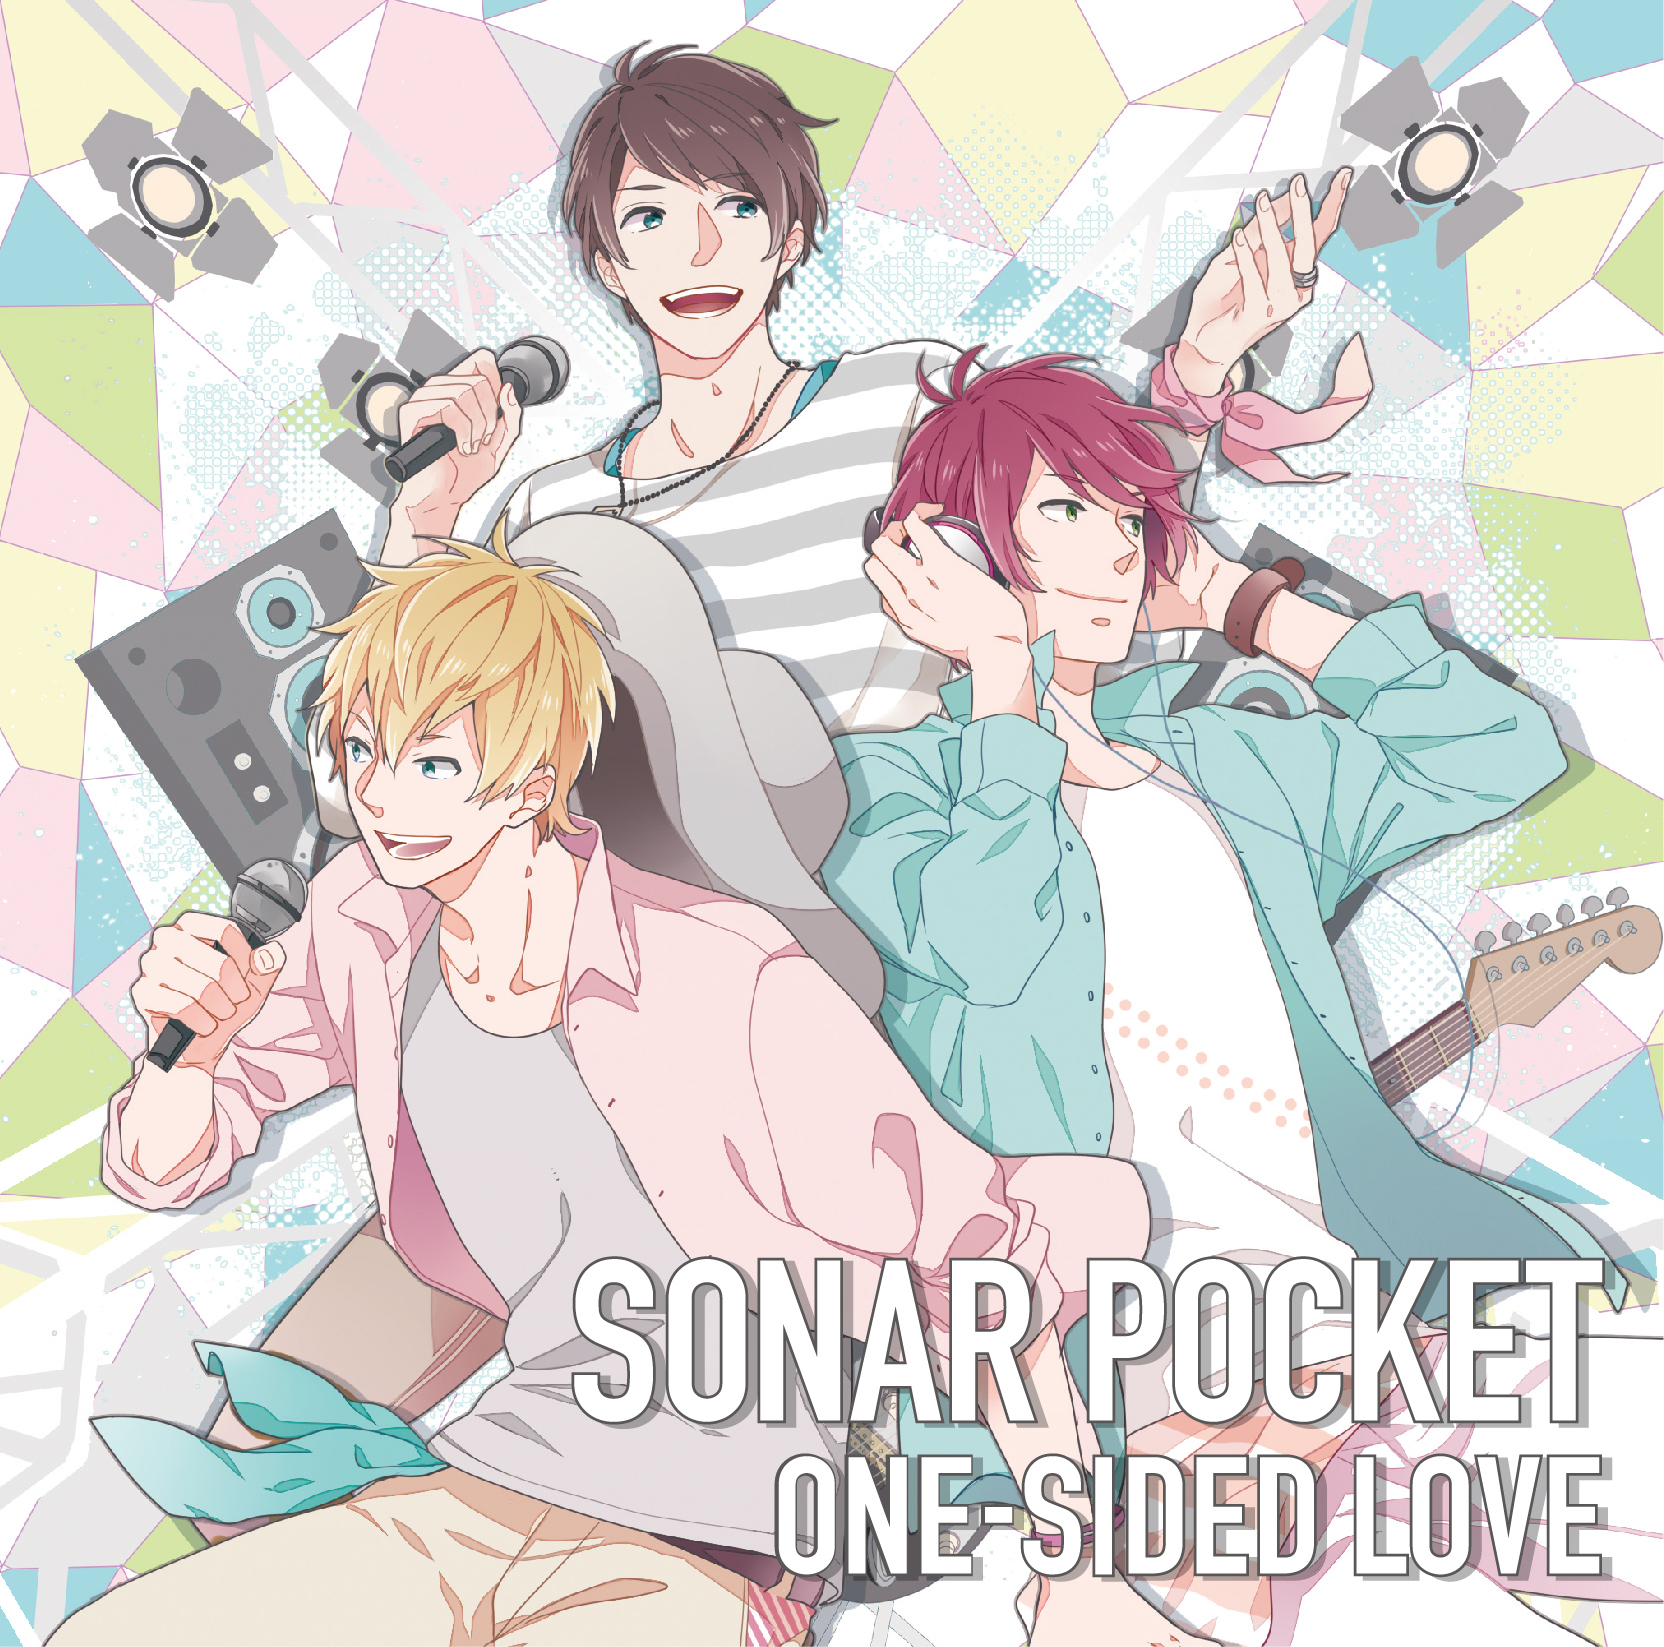 ONE-SIDED LOVE 通常盤A虹色デイズ盤.jpg